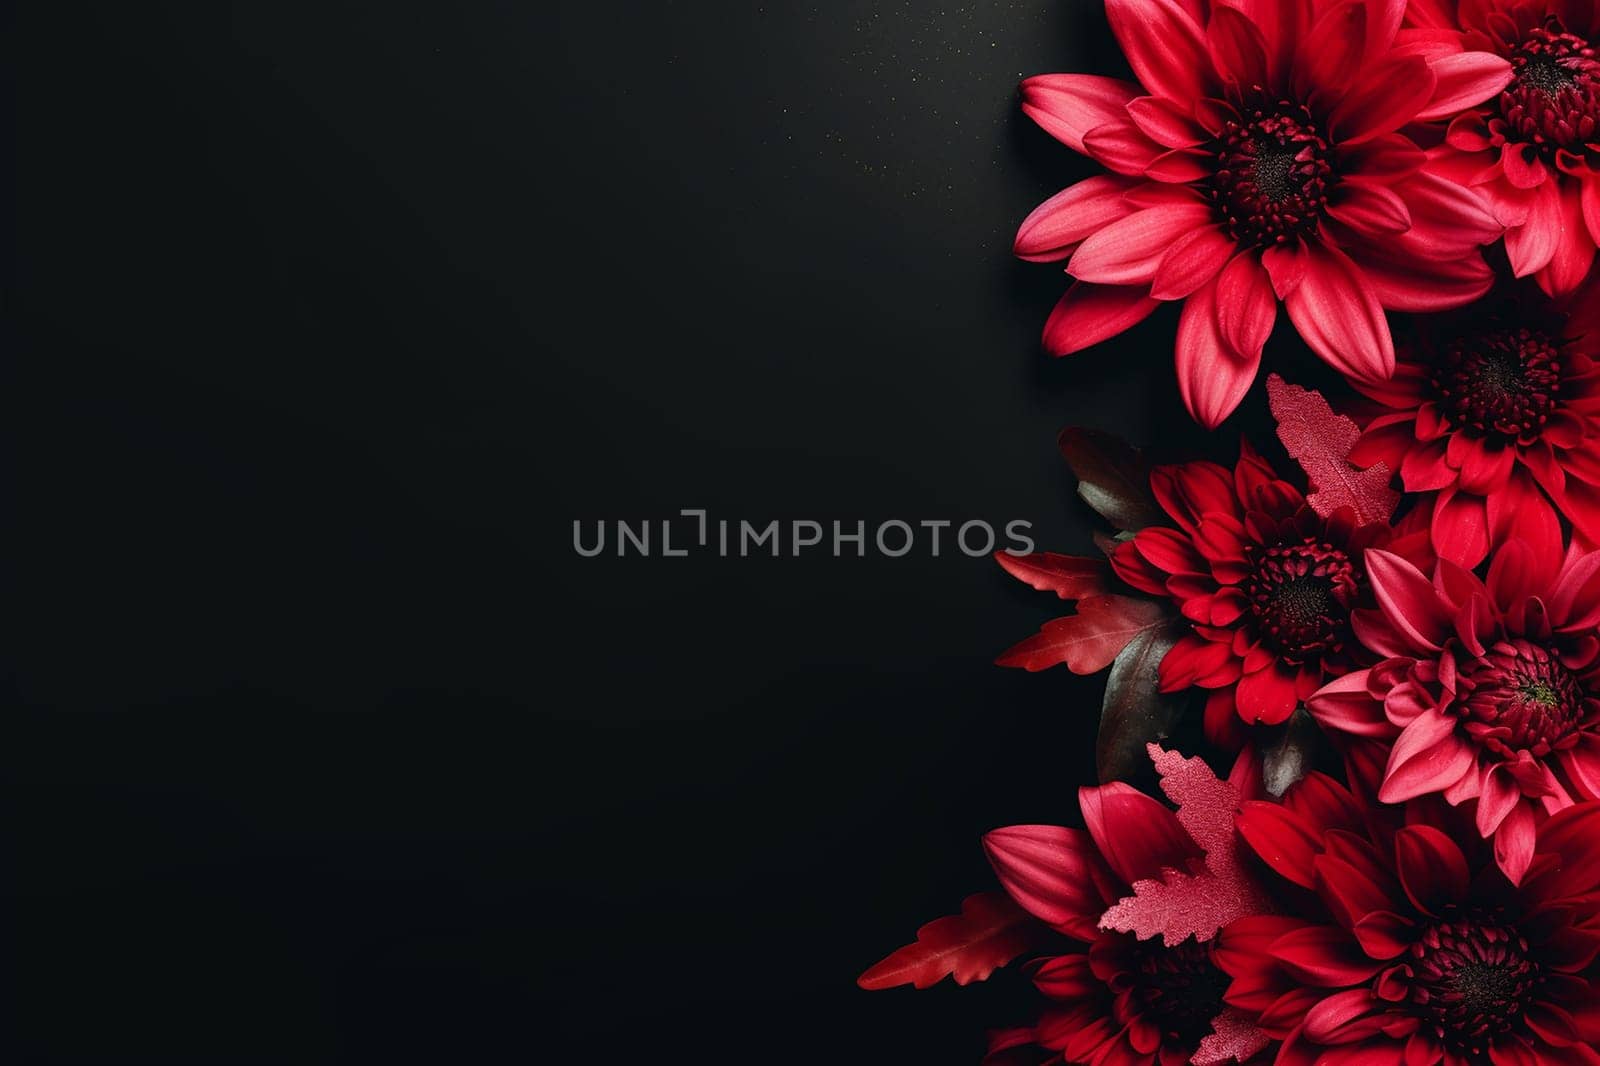 A beautiful arrangement of red flowers against a dark background.